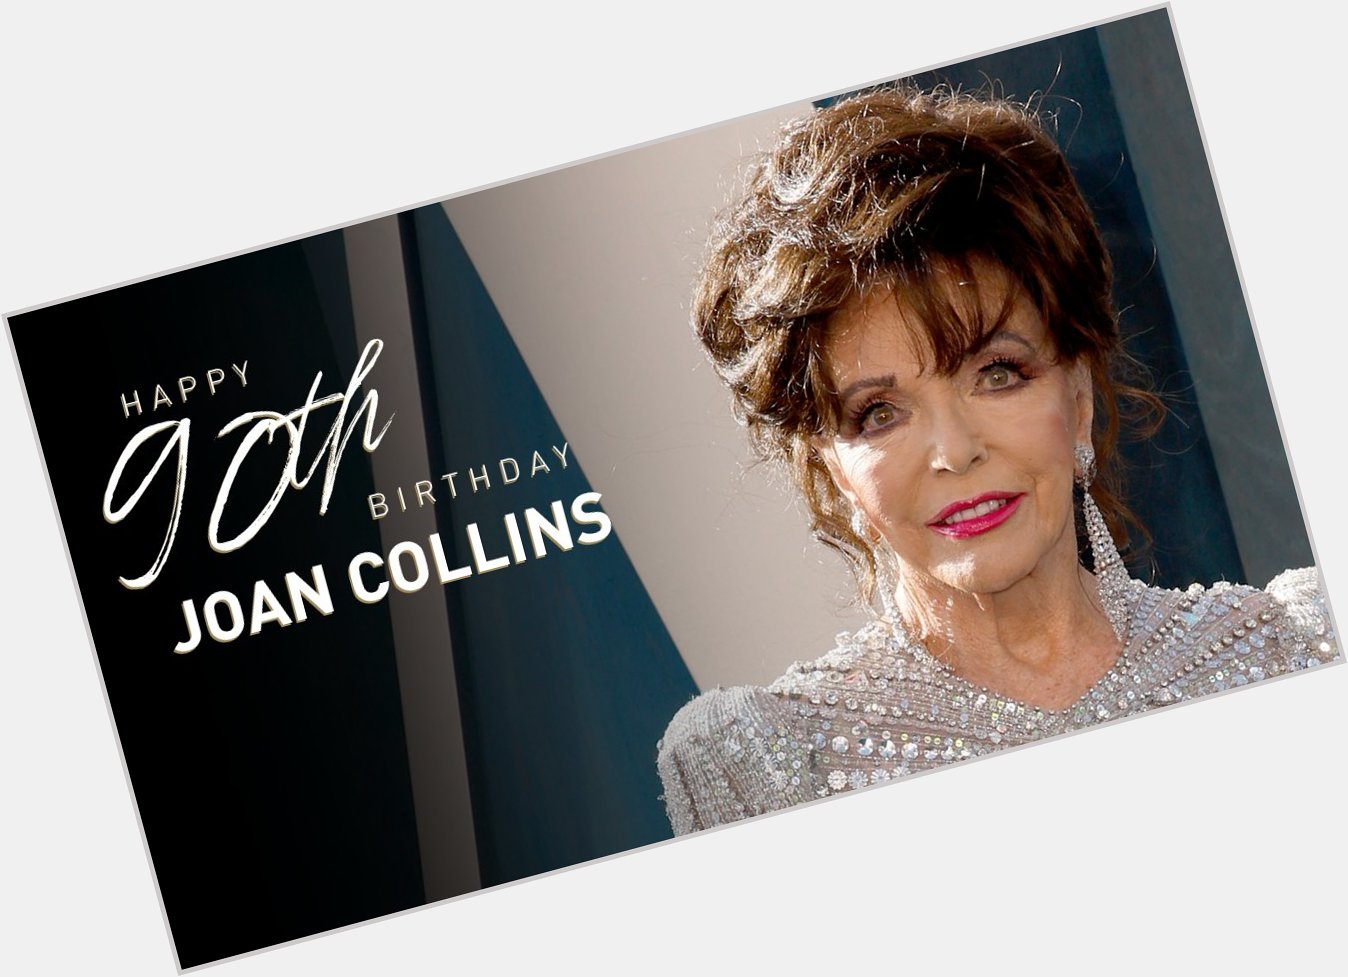 Happy 90th birthday Joan Collins!

Watch her tribute here:  